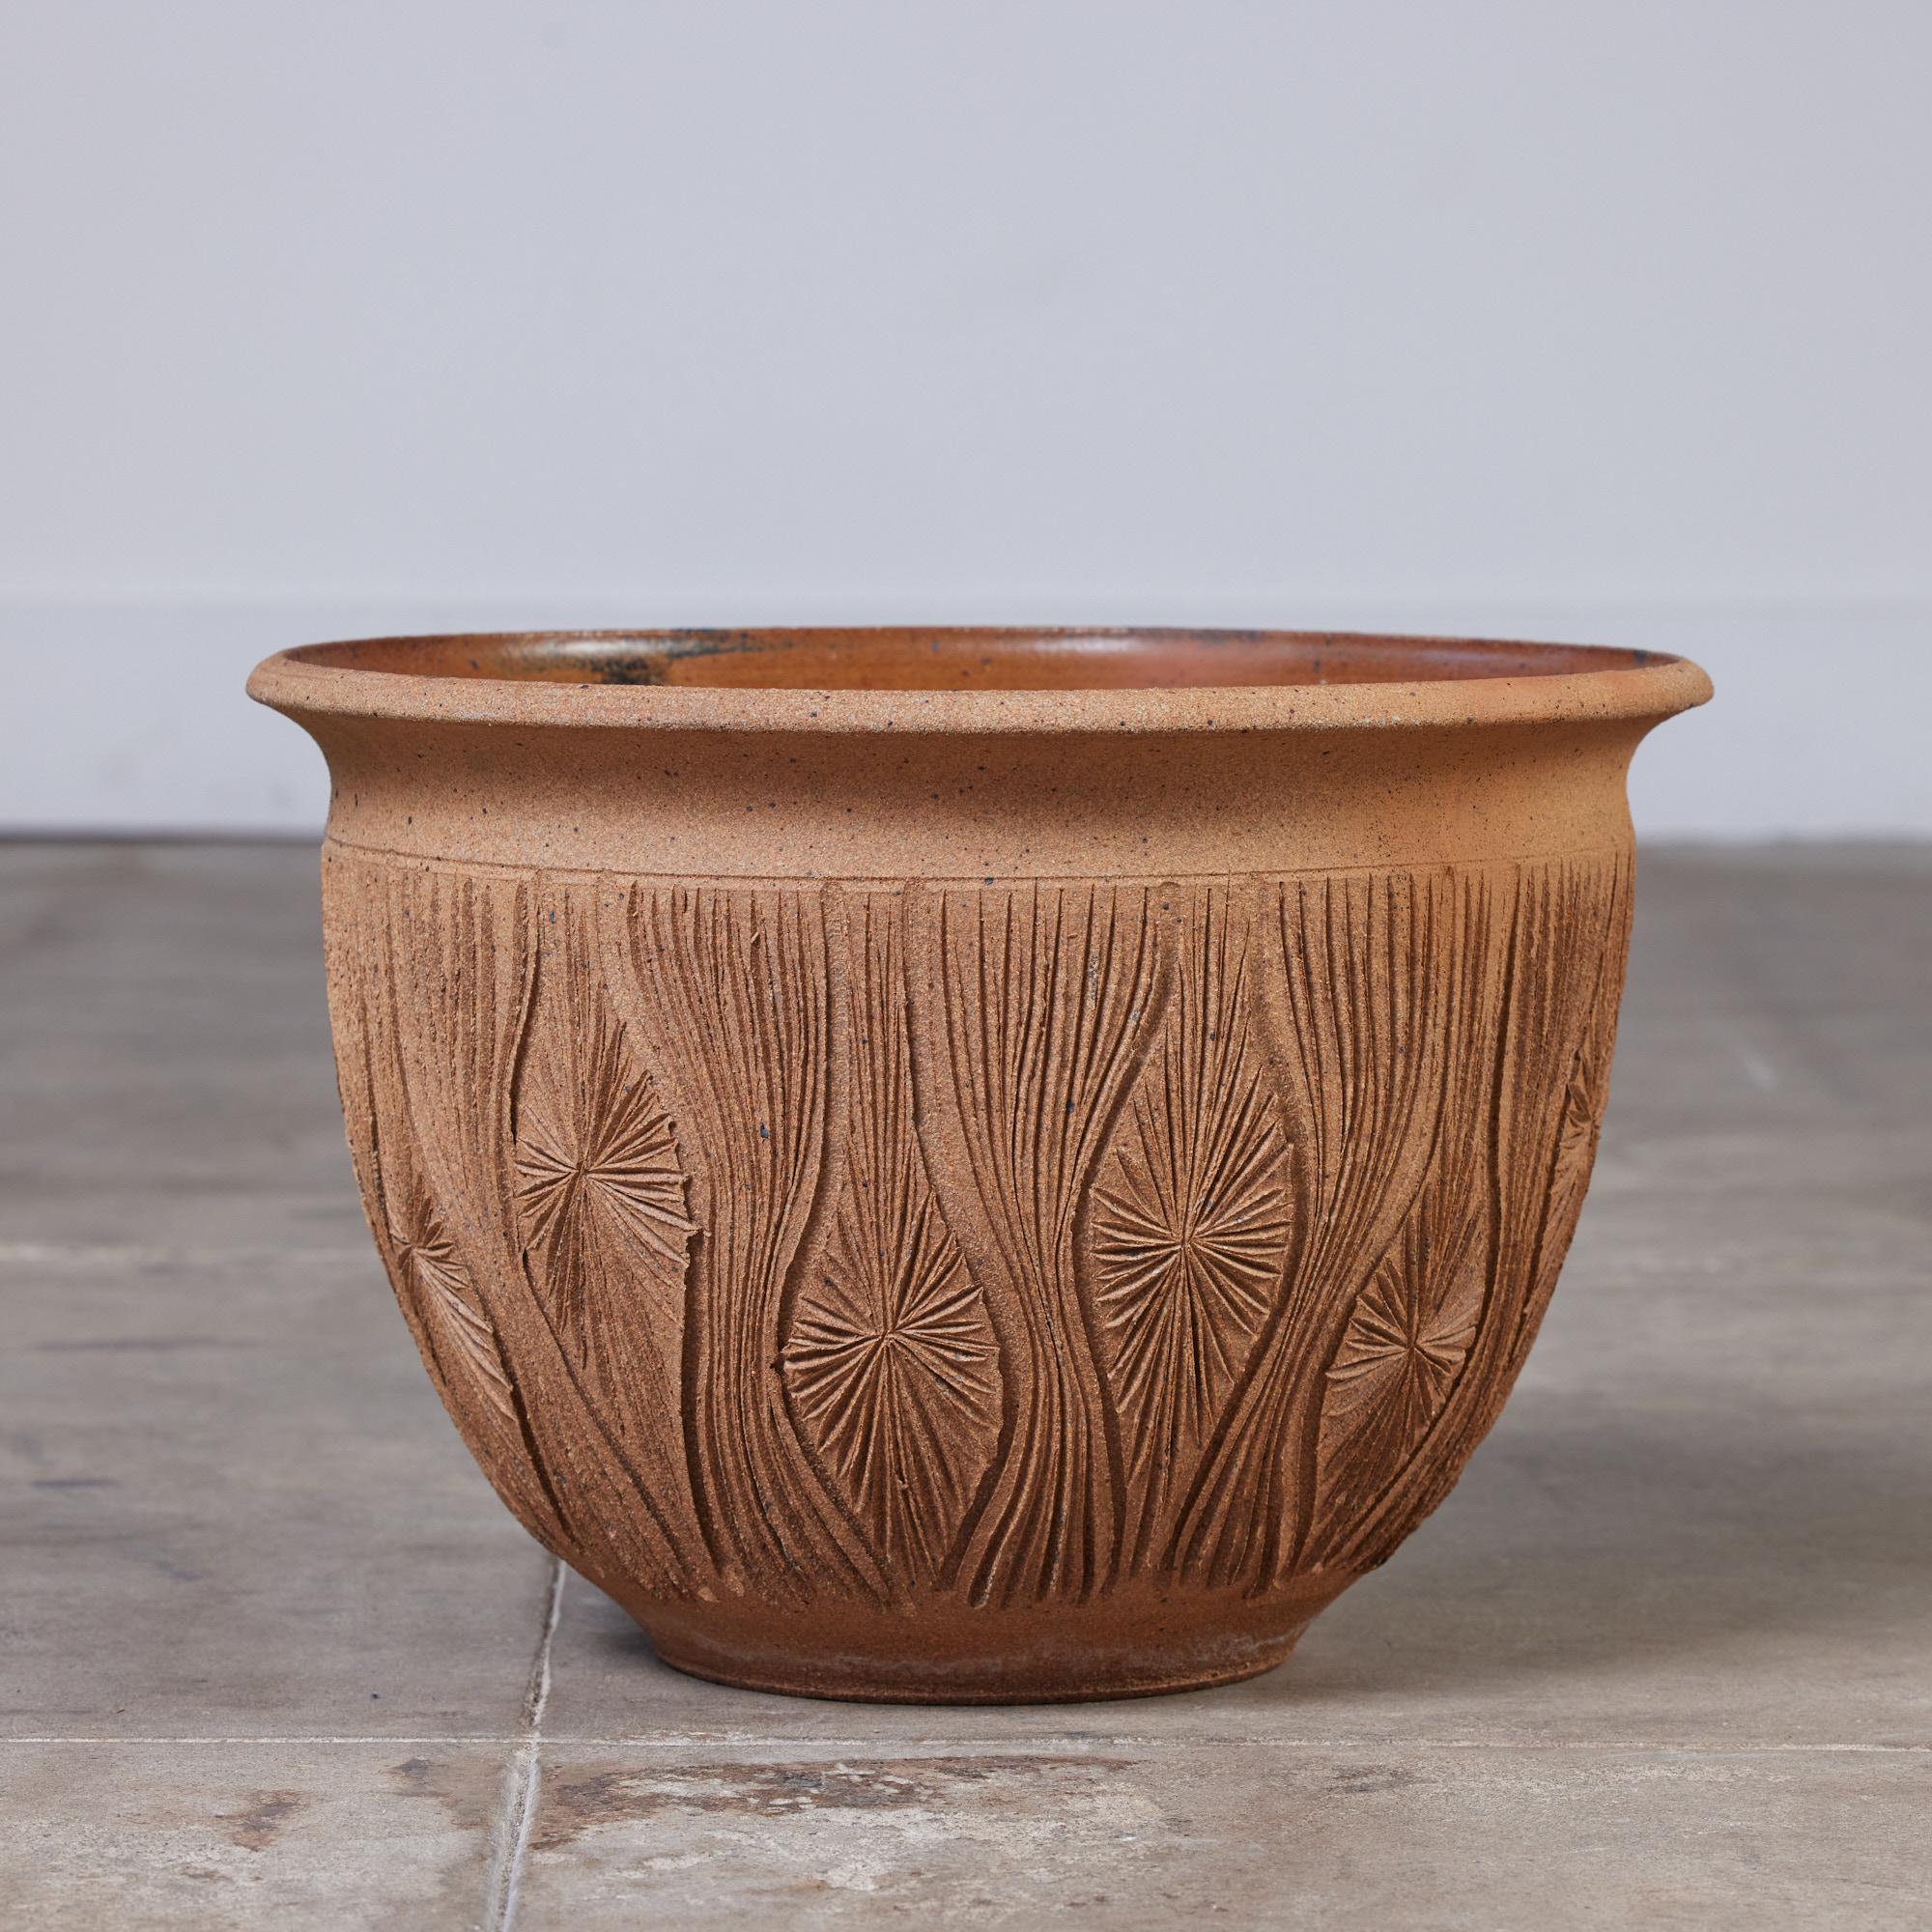 An unglazed stoneware bowl planter from David Cressey and Robert Maxwell's 1970's collaboration, Earthgender. The planter has a rounded lip, an incised all-over pattern in the 